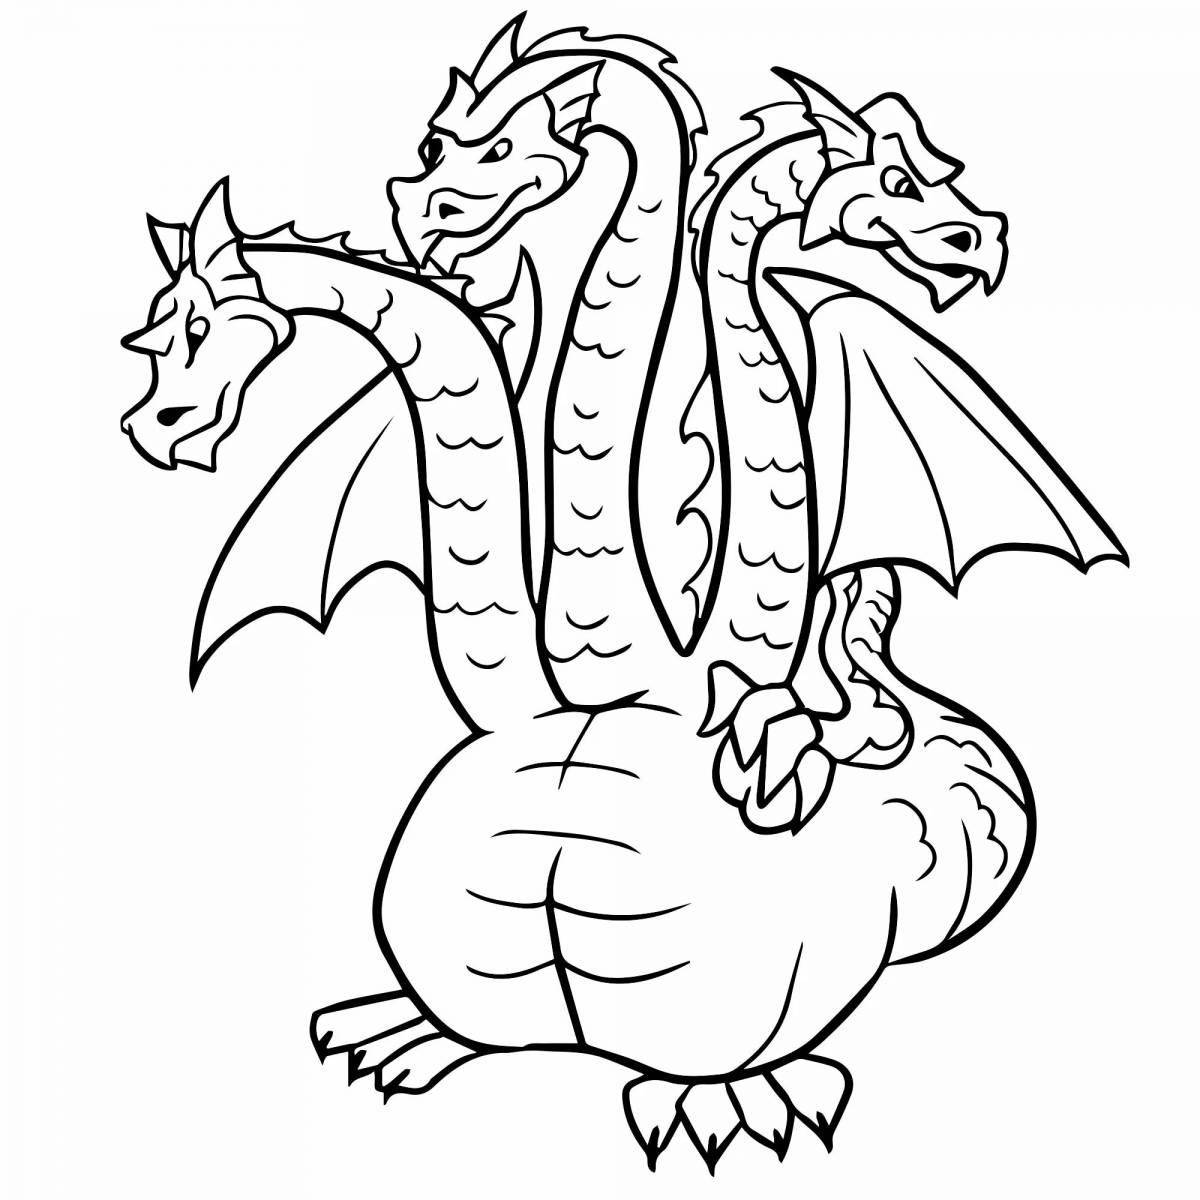 Dazzling dragon coloring page